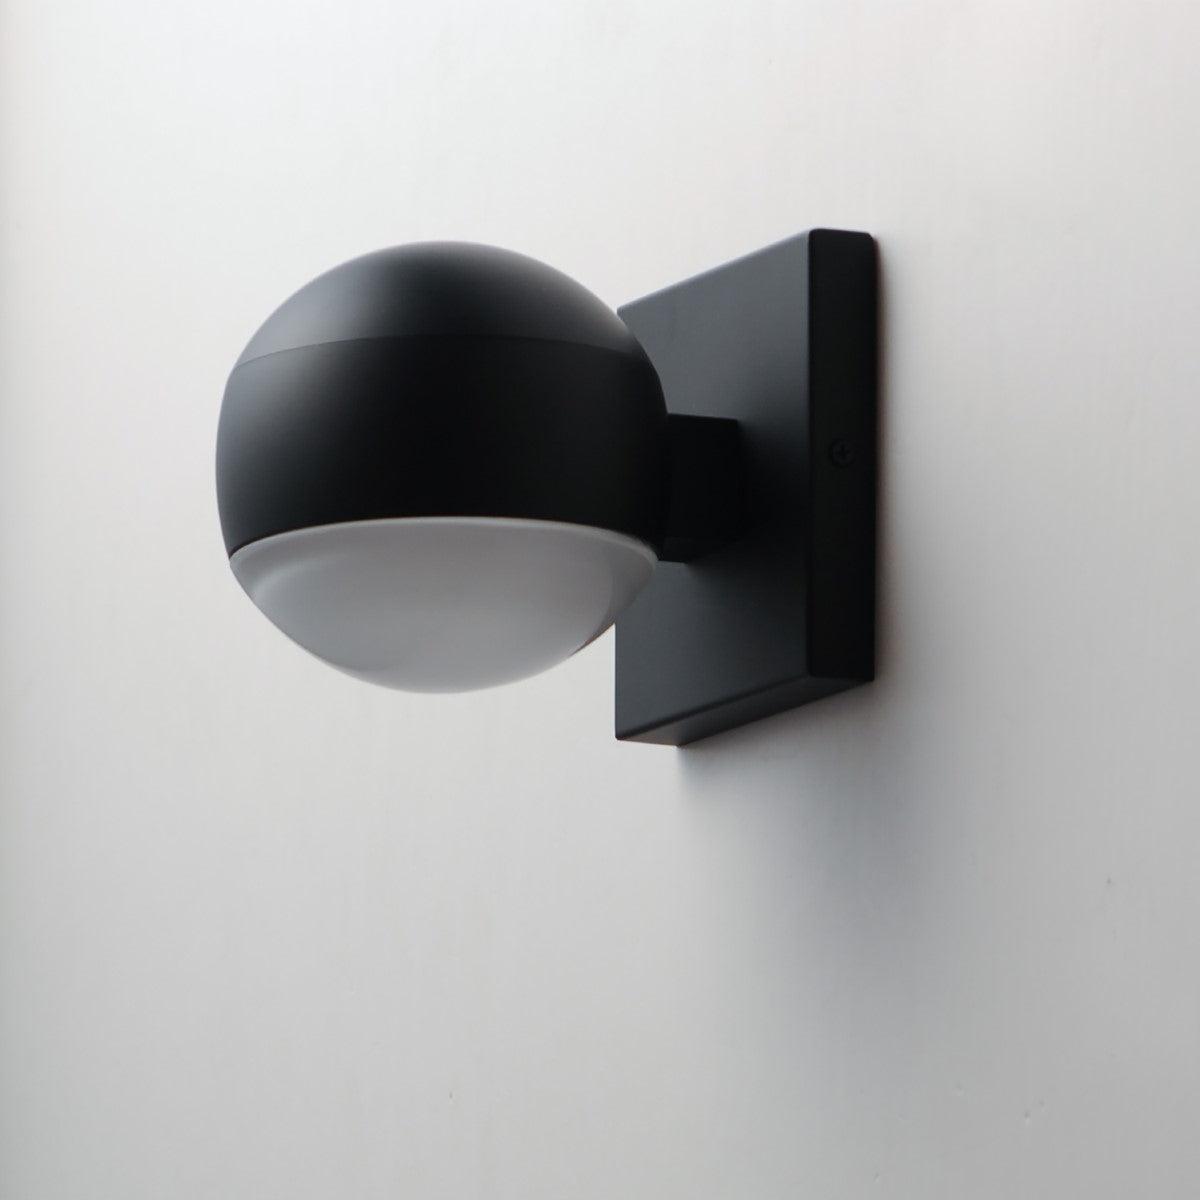 Modular 5 in. Sphere LED Outdoor Wall Sconce 3000K Black Finish